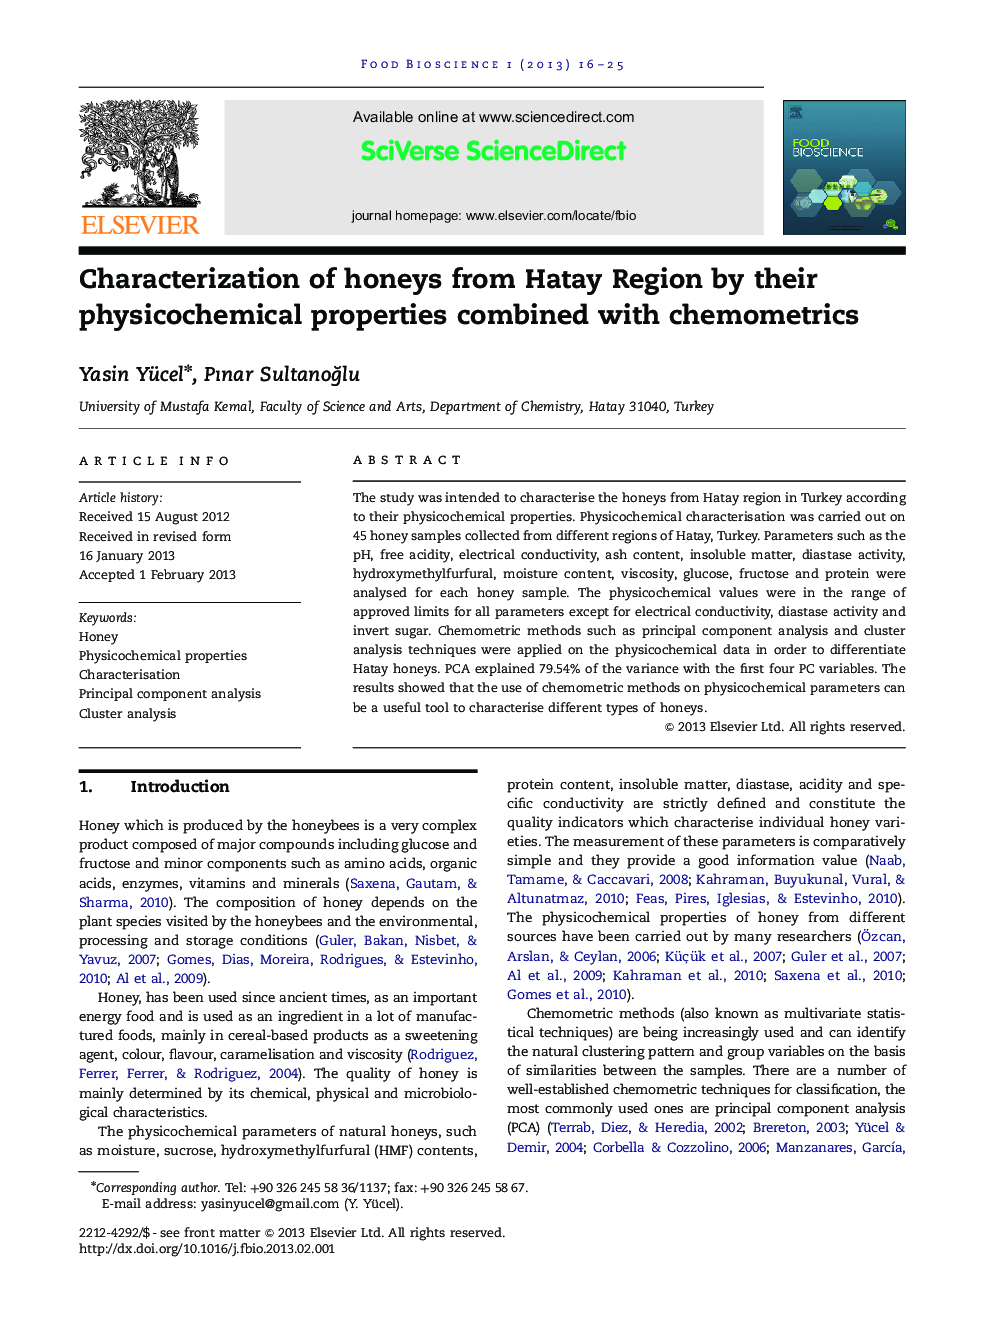 Characterization of honeys from Hatay Region by their physicochemical properties combined with chemometrics